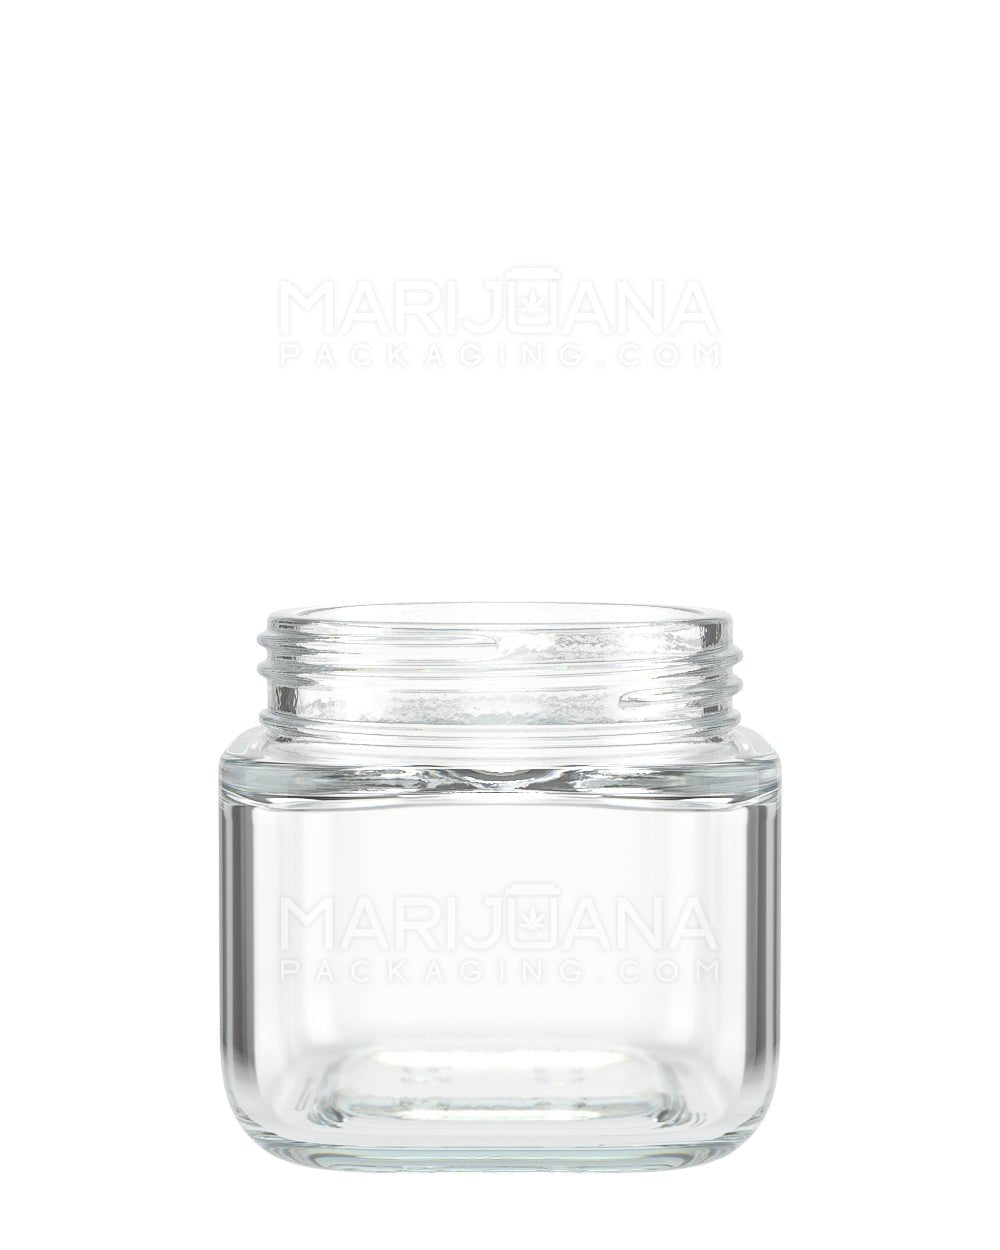 POLLEN GEAR | SoftSquare Clear Glass Jar | 46mm - 3.75oz - 72 Count - 1